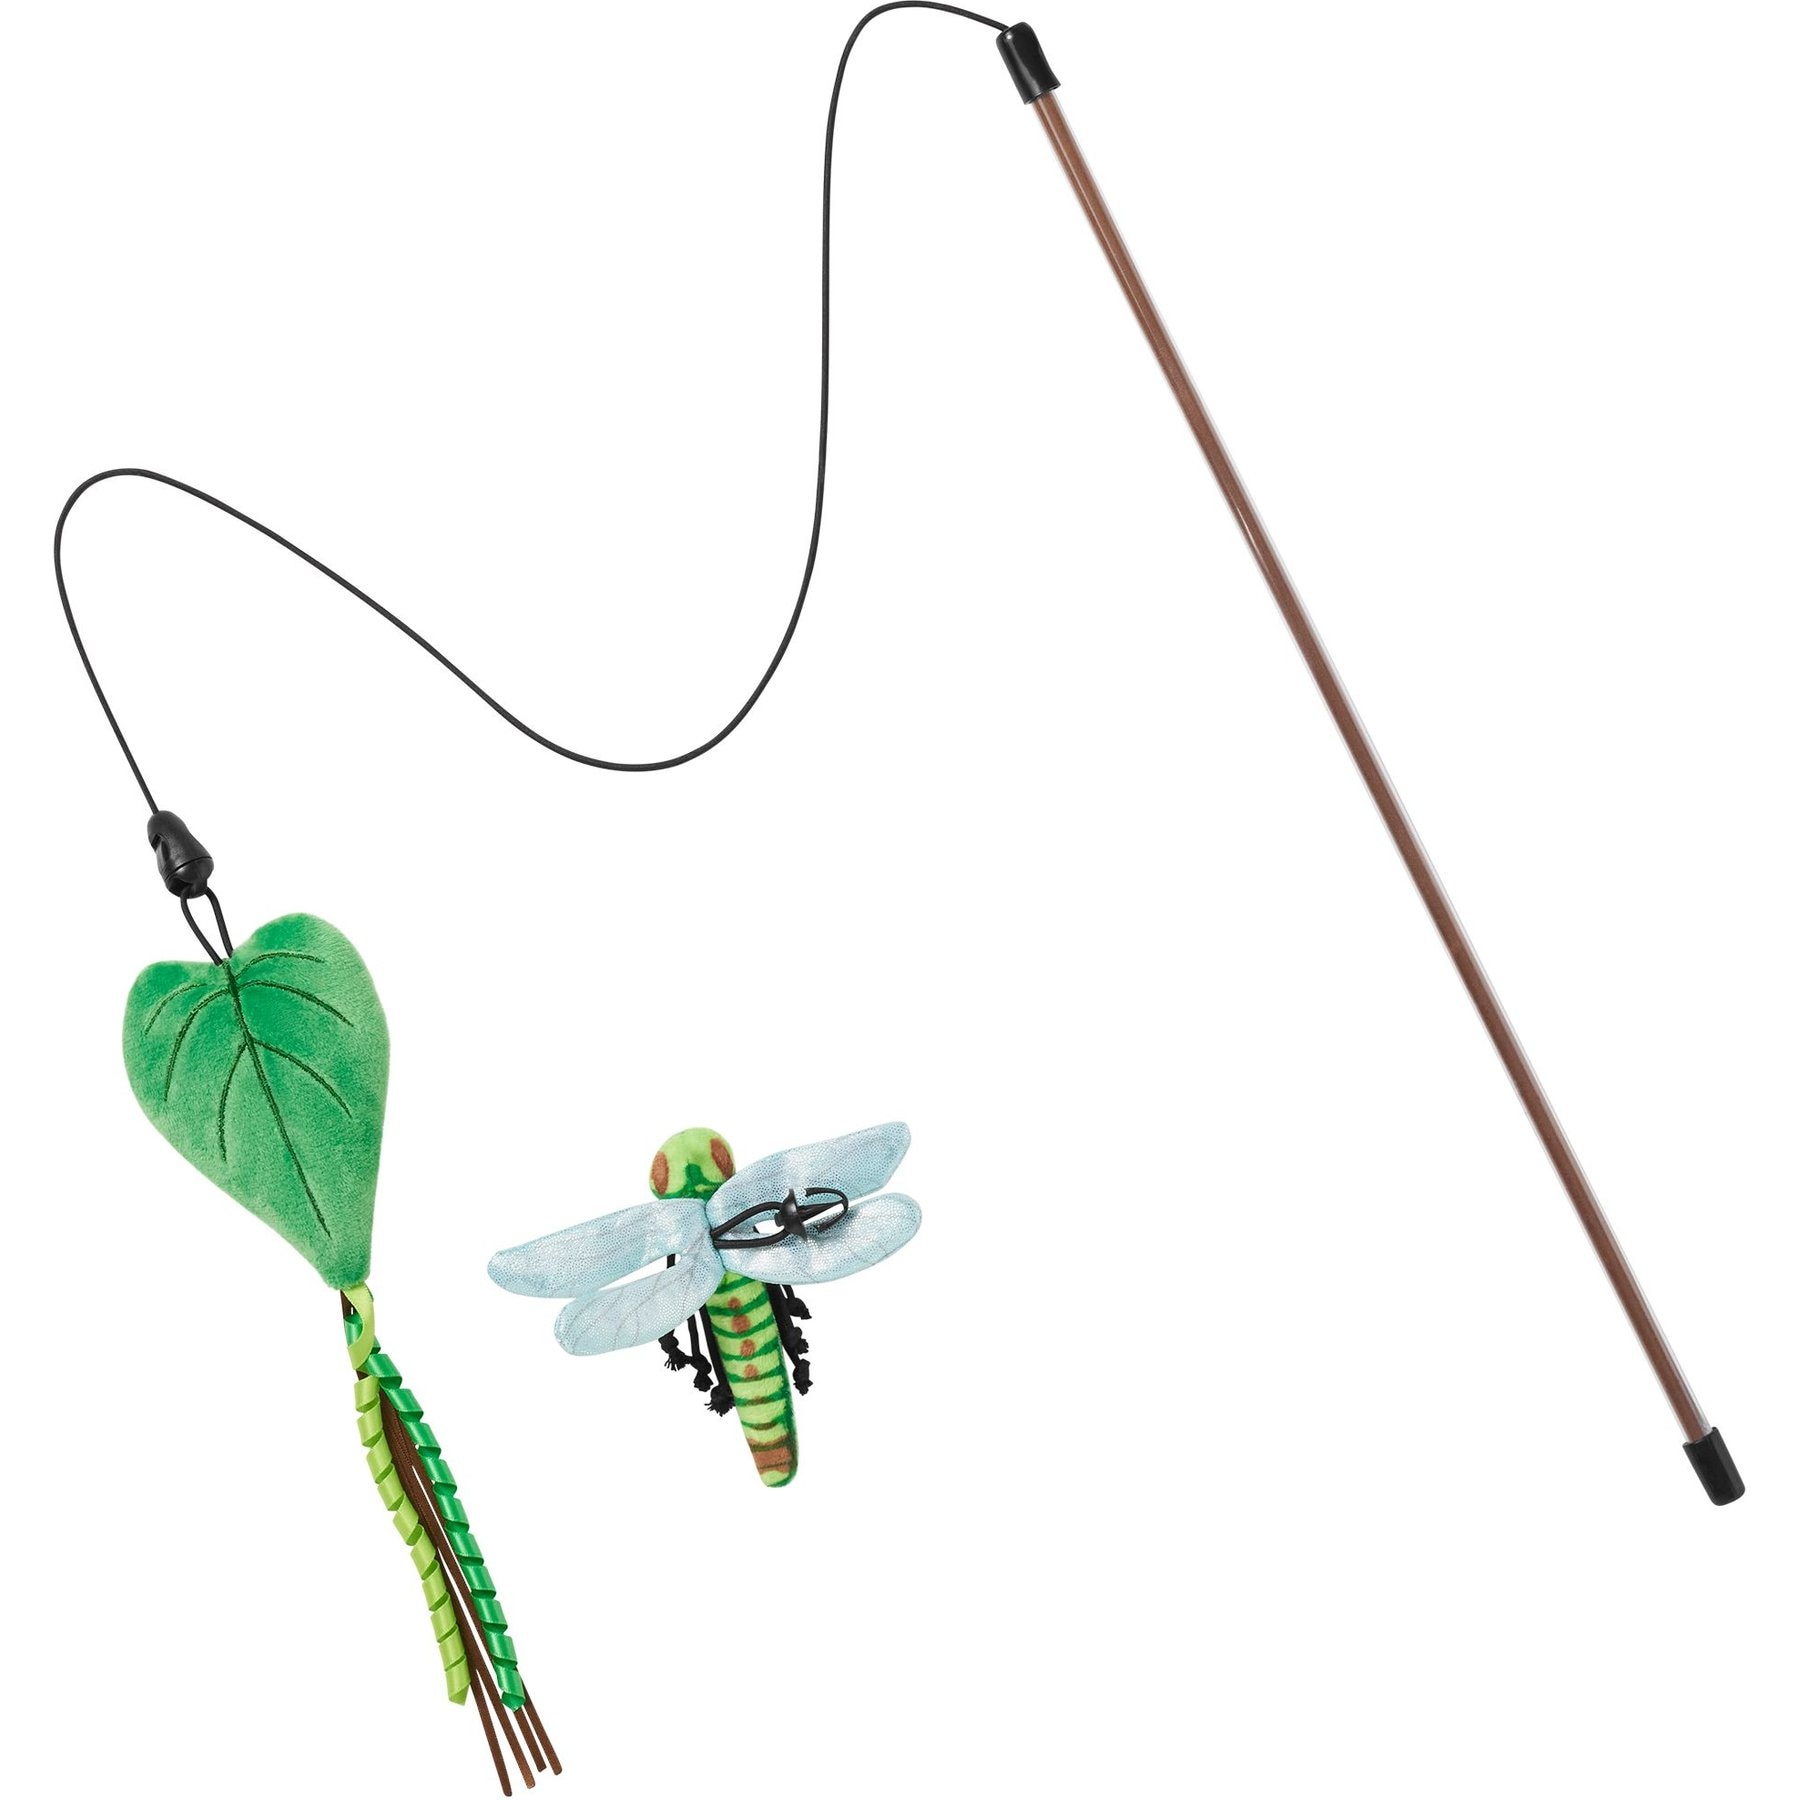 Pick 2 Cat-fishing Lures, Rabbit Fur, Feathers, Leather, Cork, Cheese Cloth  Dragonfly Wings, Interactive Cat Toy 